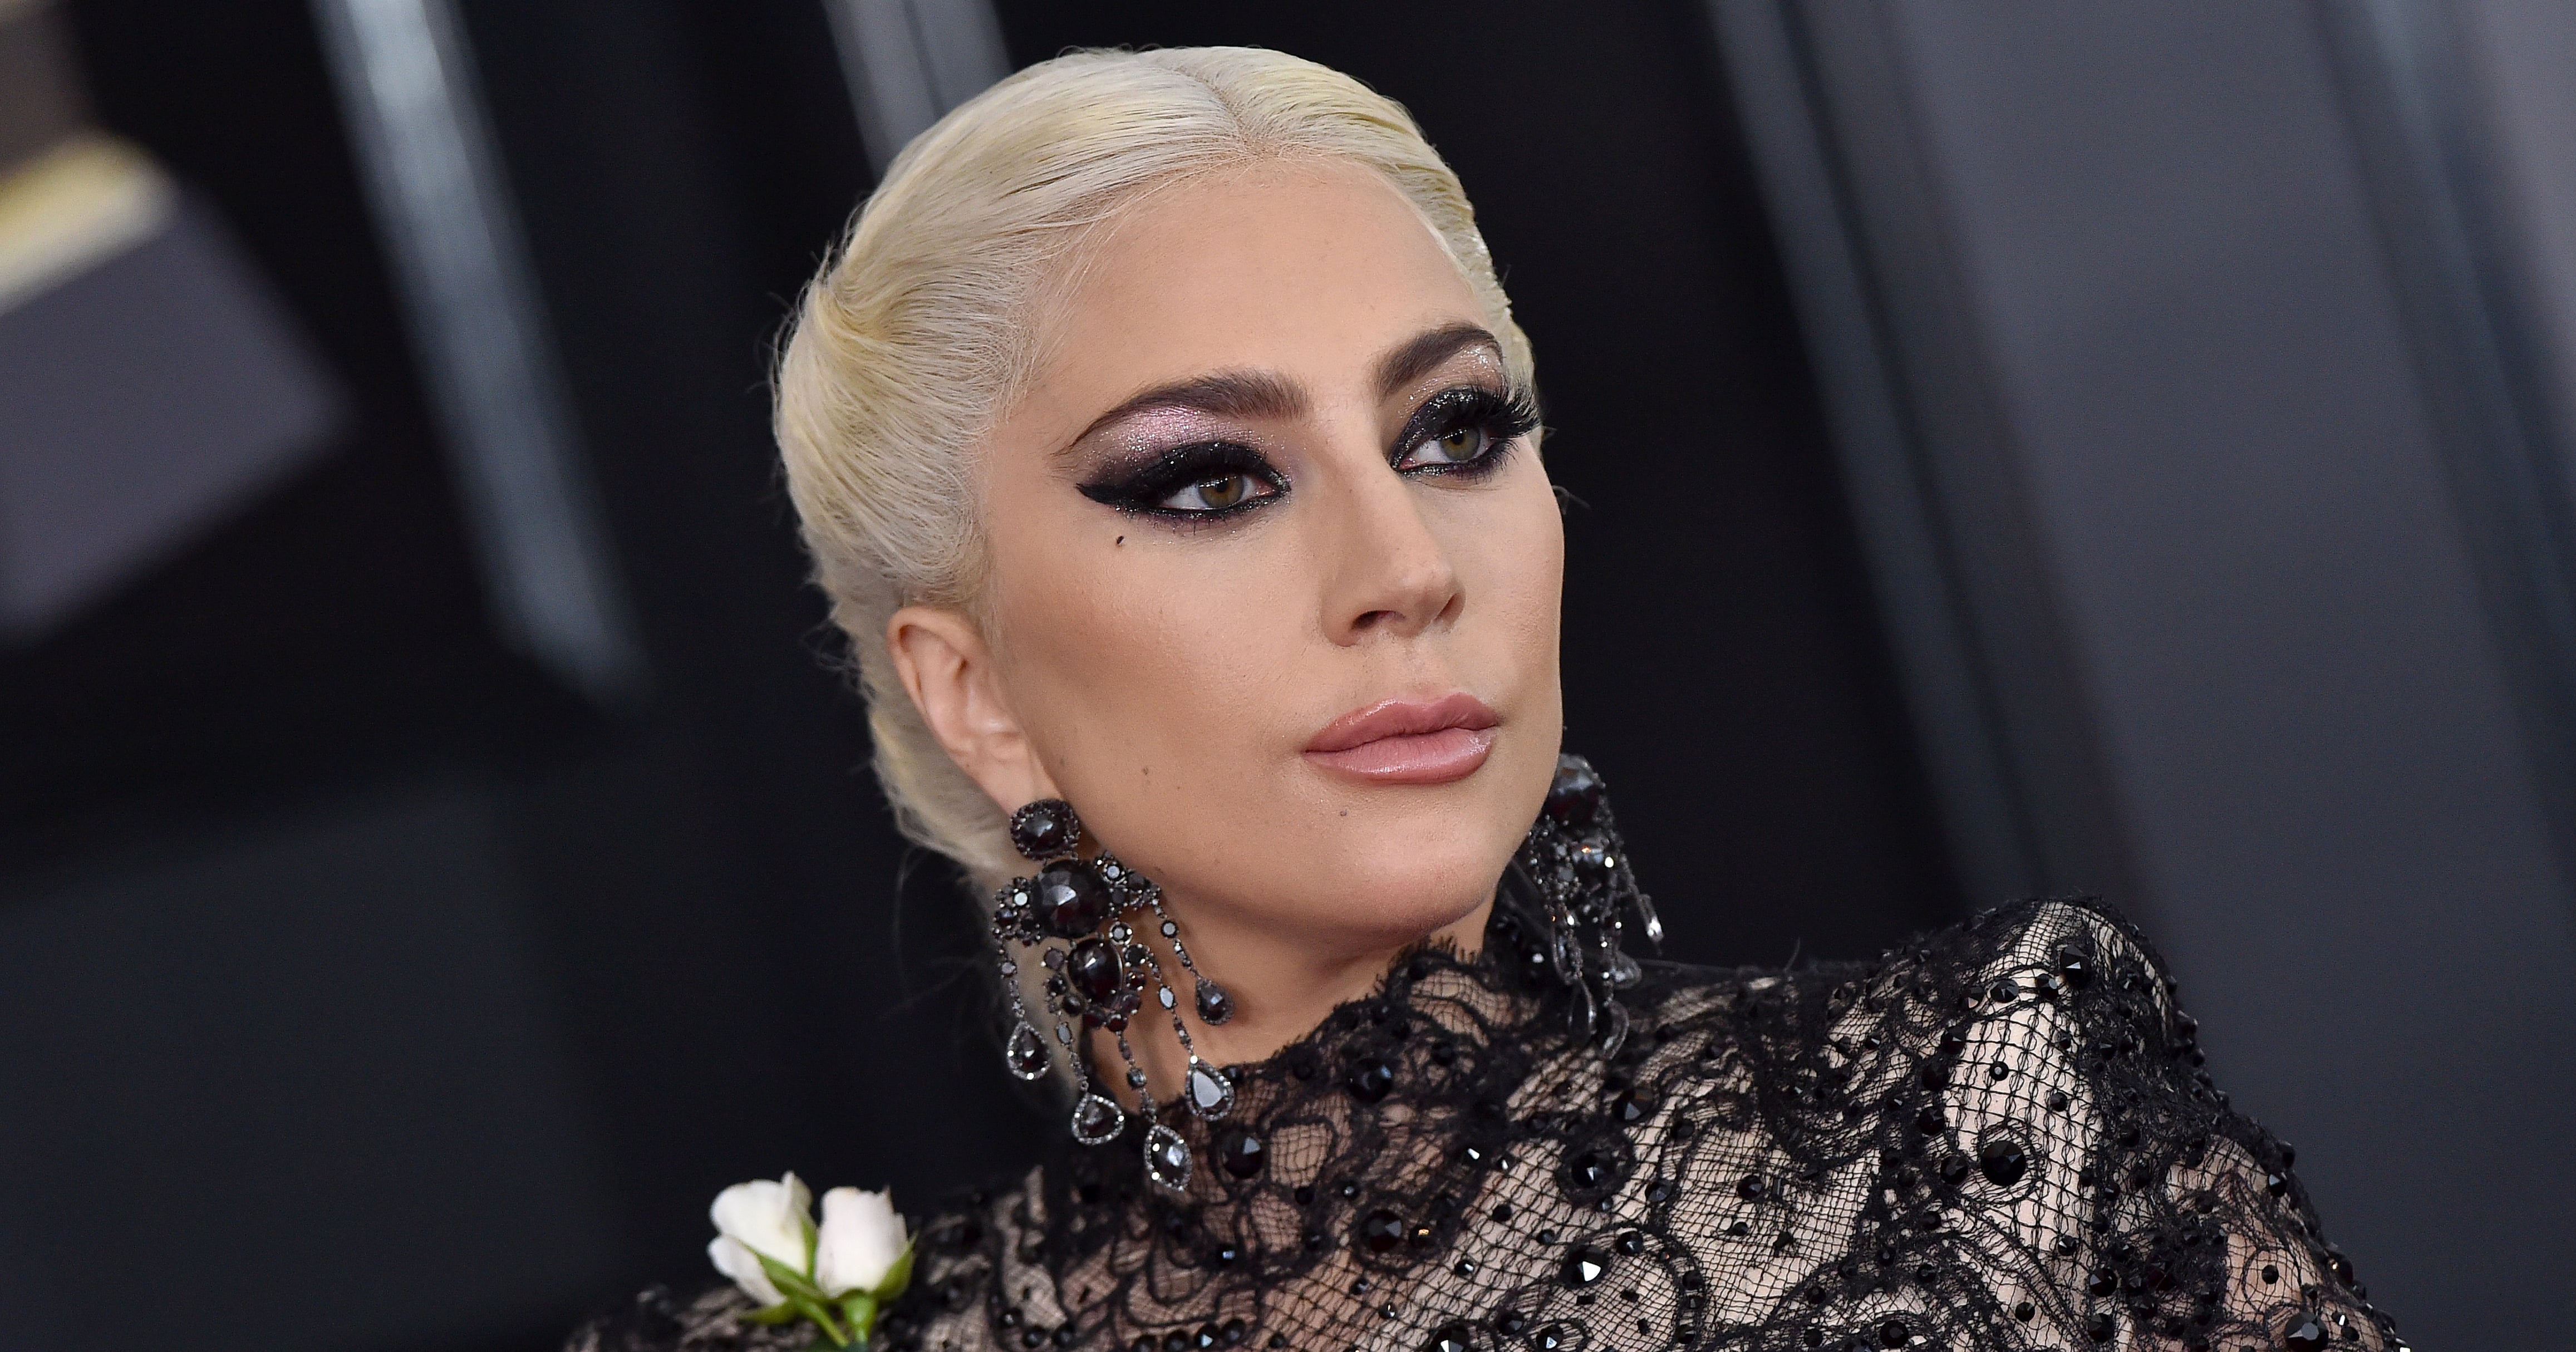 Lady Gaga's true crime film about the Gucci family will be released in 2021